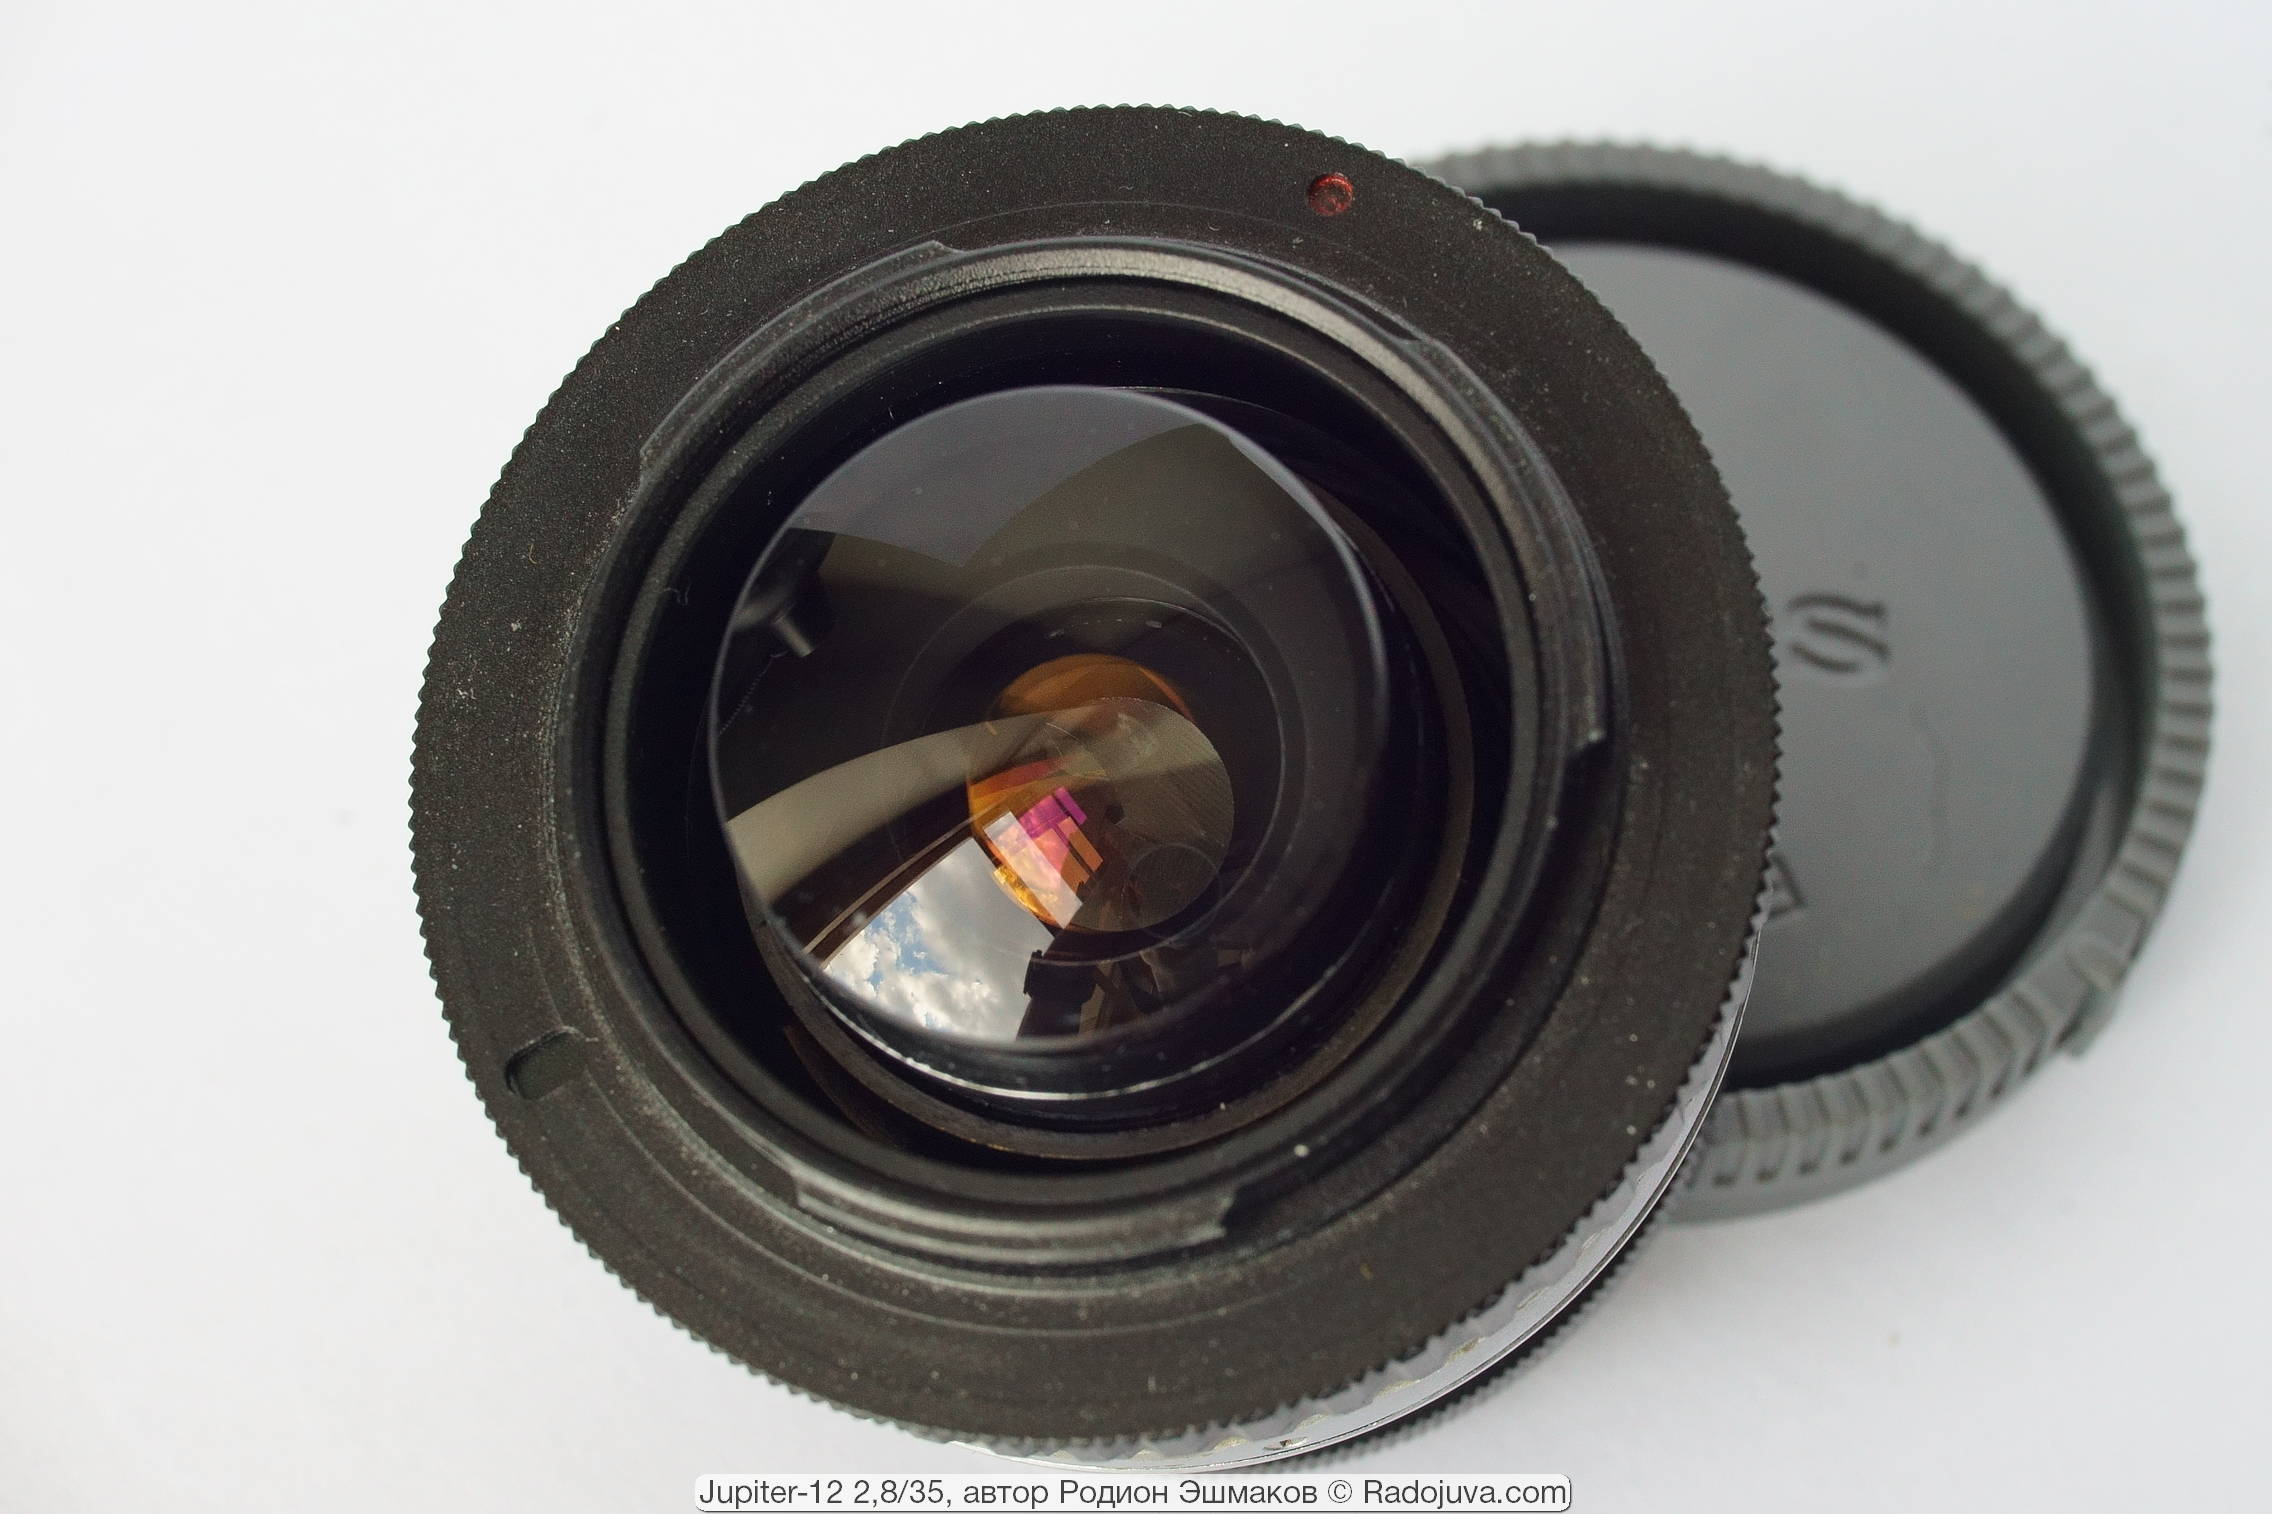 View of the Jupiter-12 diaphragm through the rear lens group.